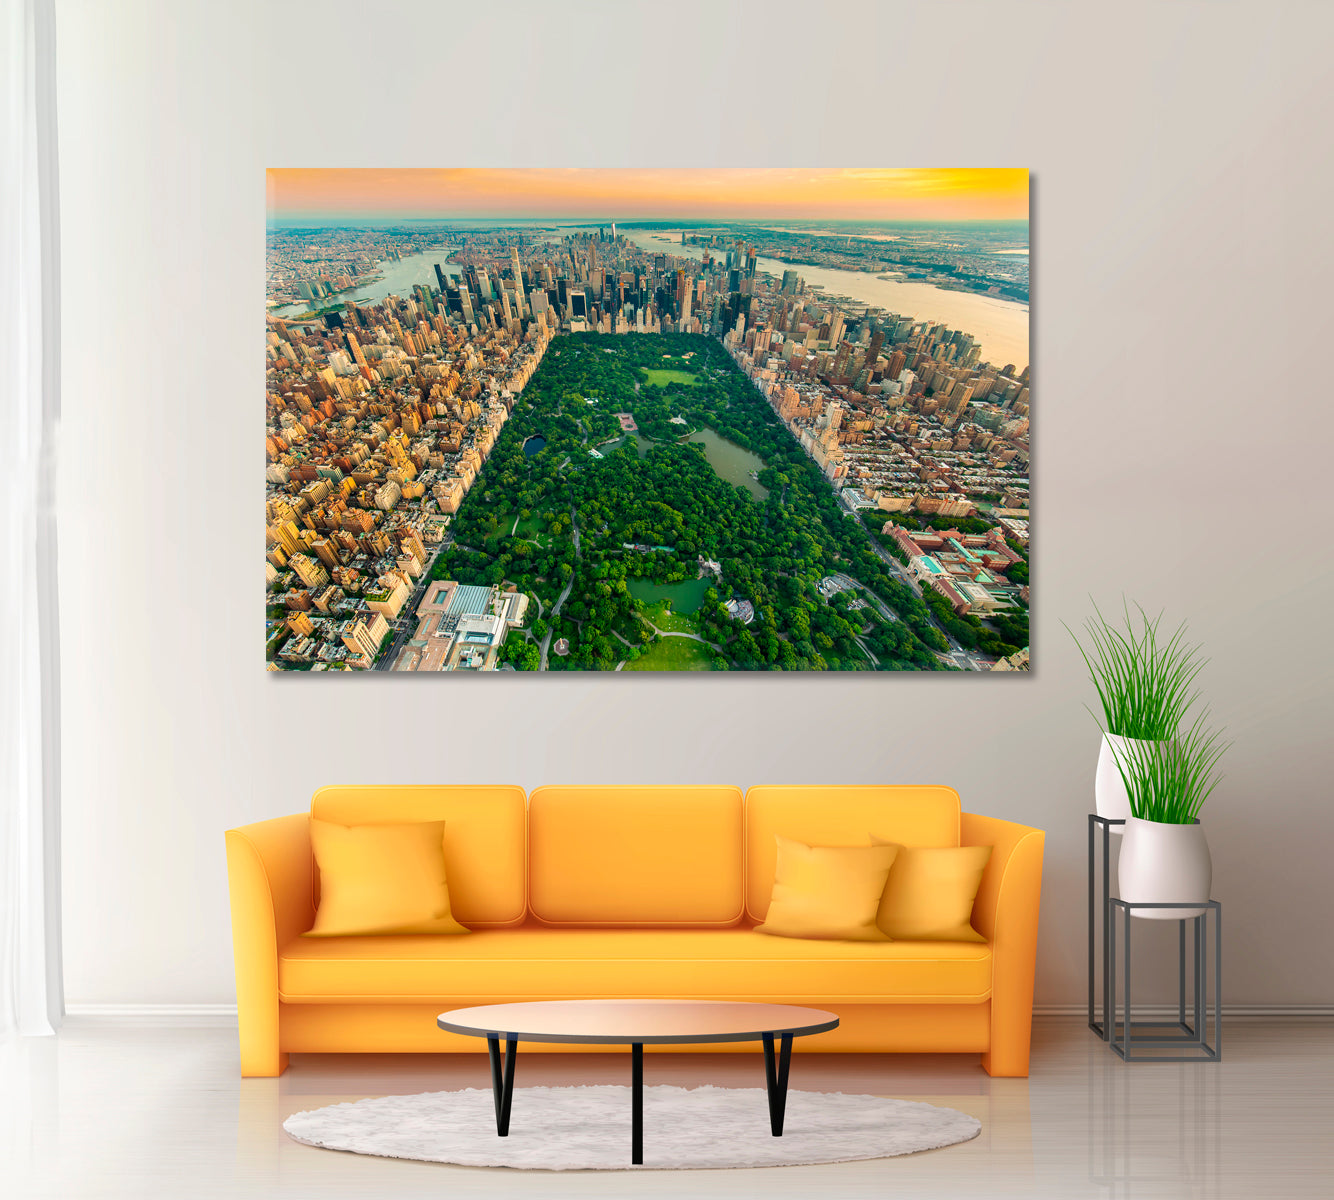 New York Central Park Canvas Print ArtLexy 1 Panel 24"x16" inches 